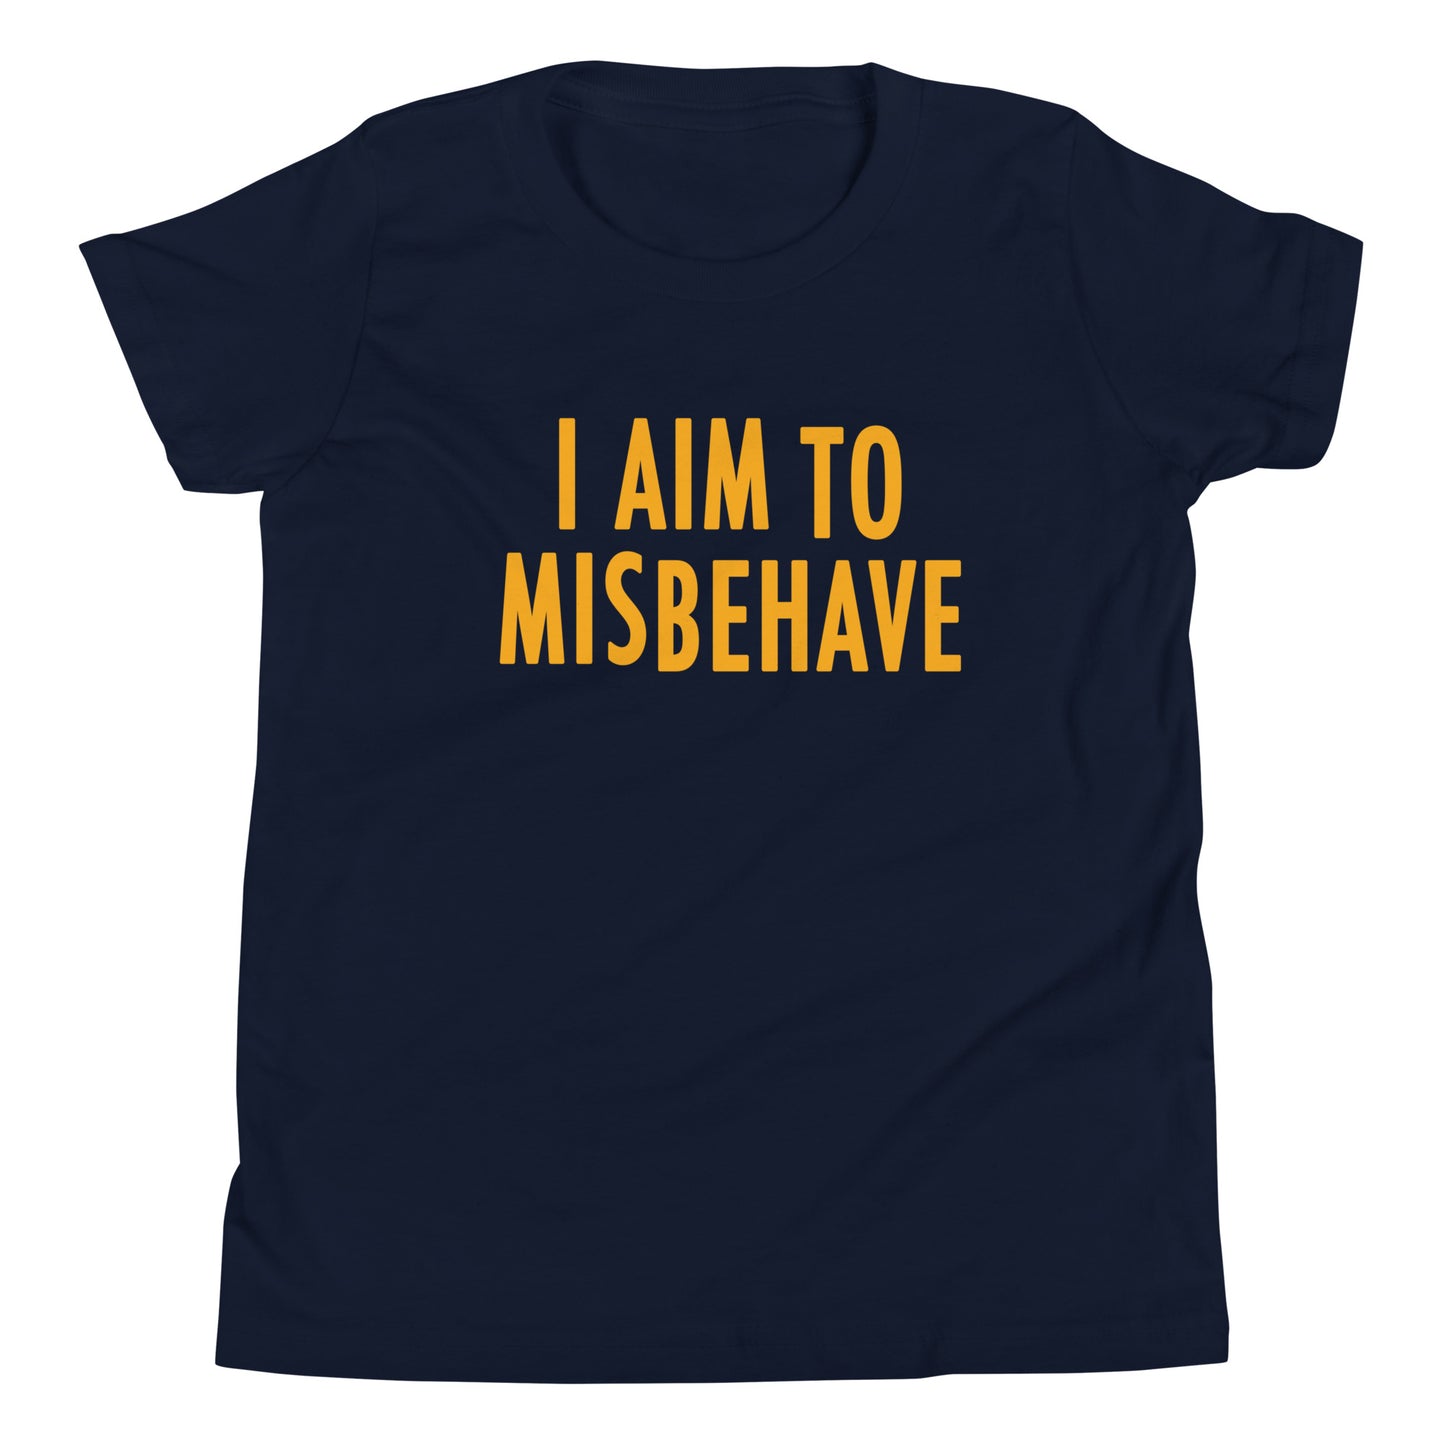 I Aim To Misbehave Kid's Youth Tee